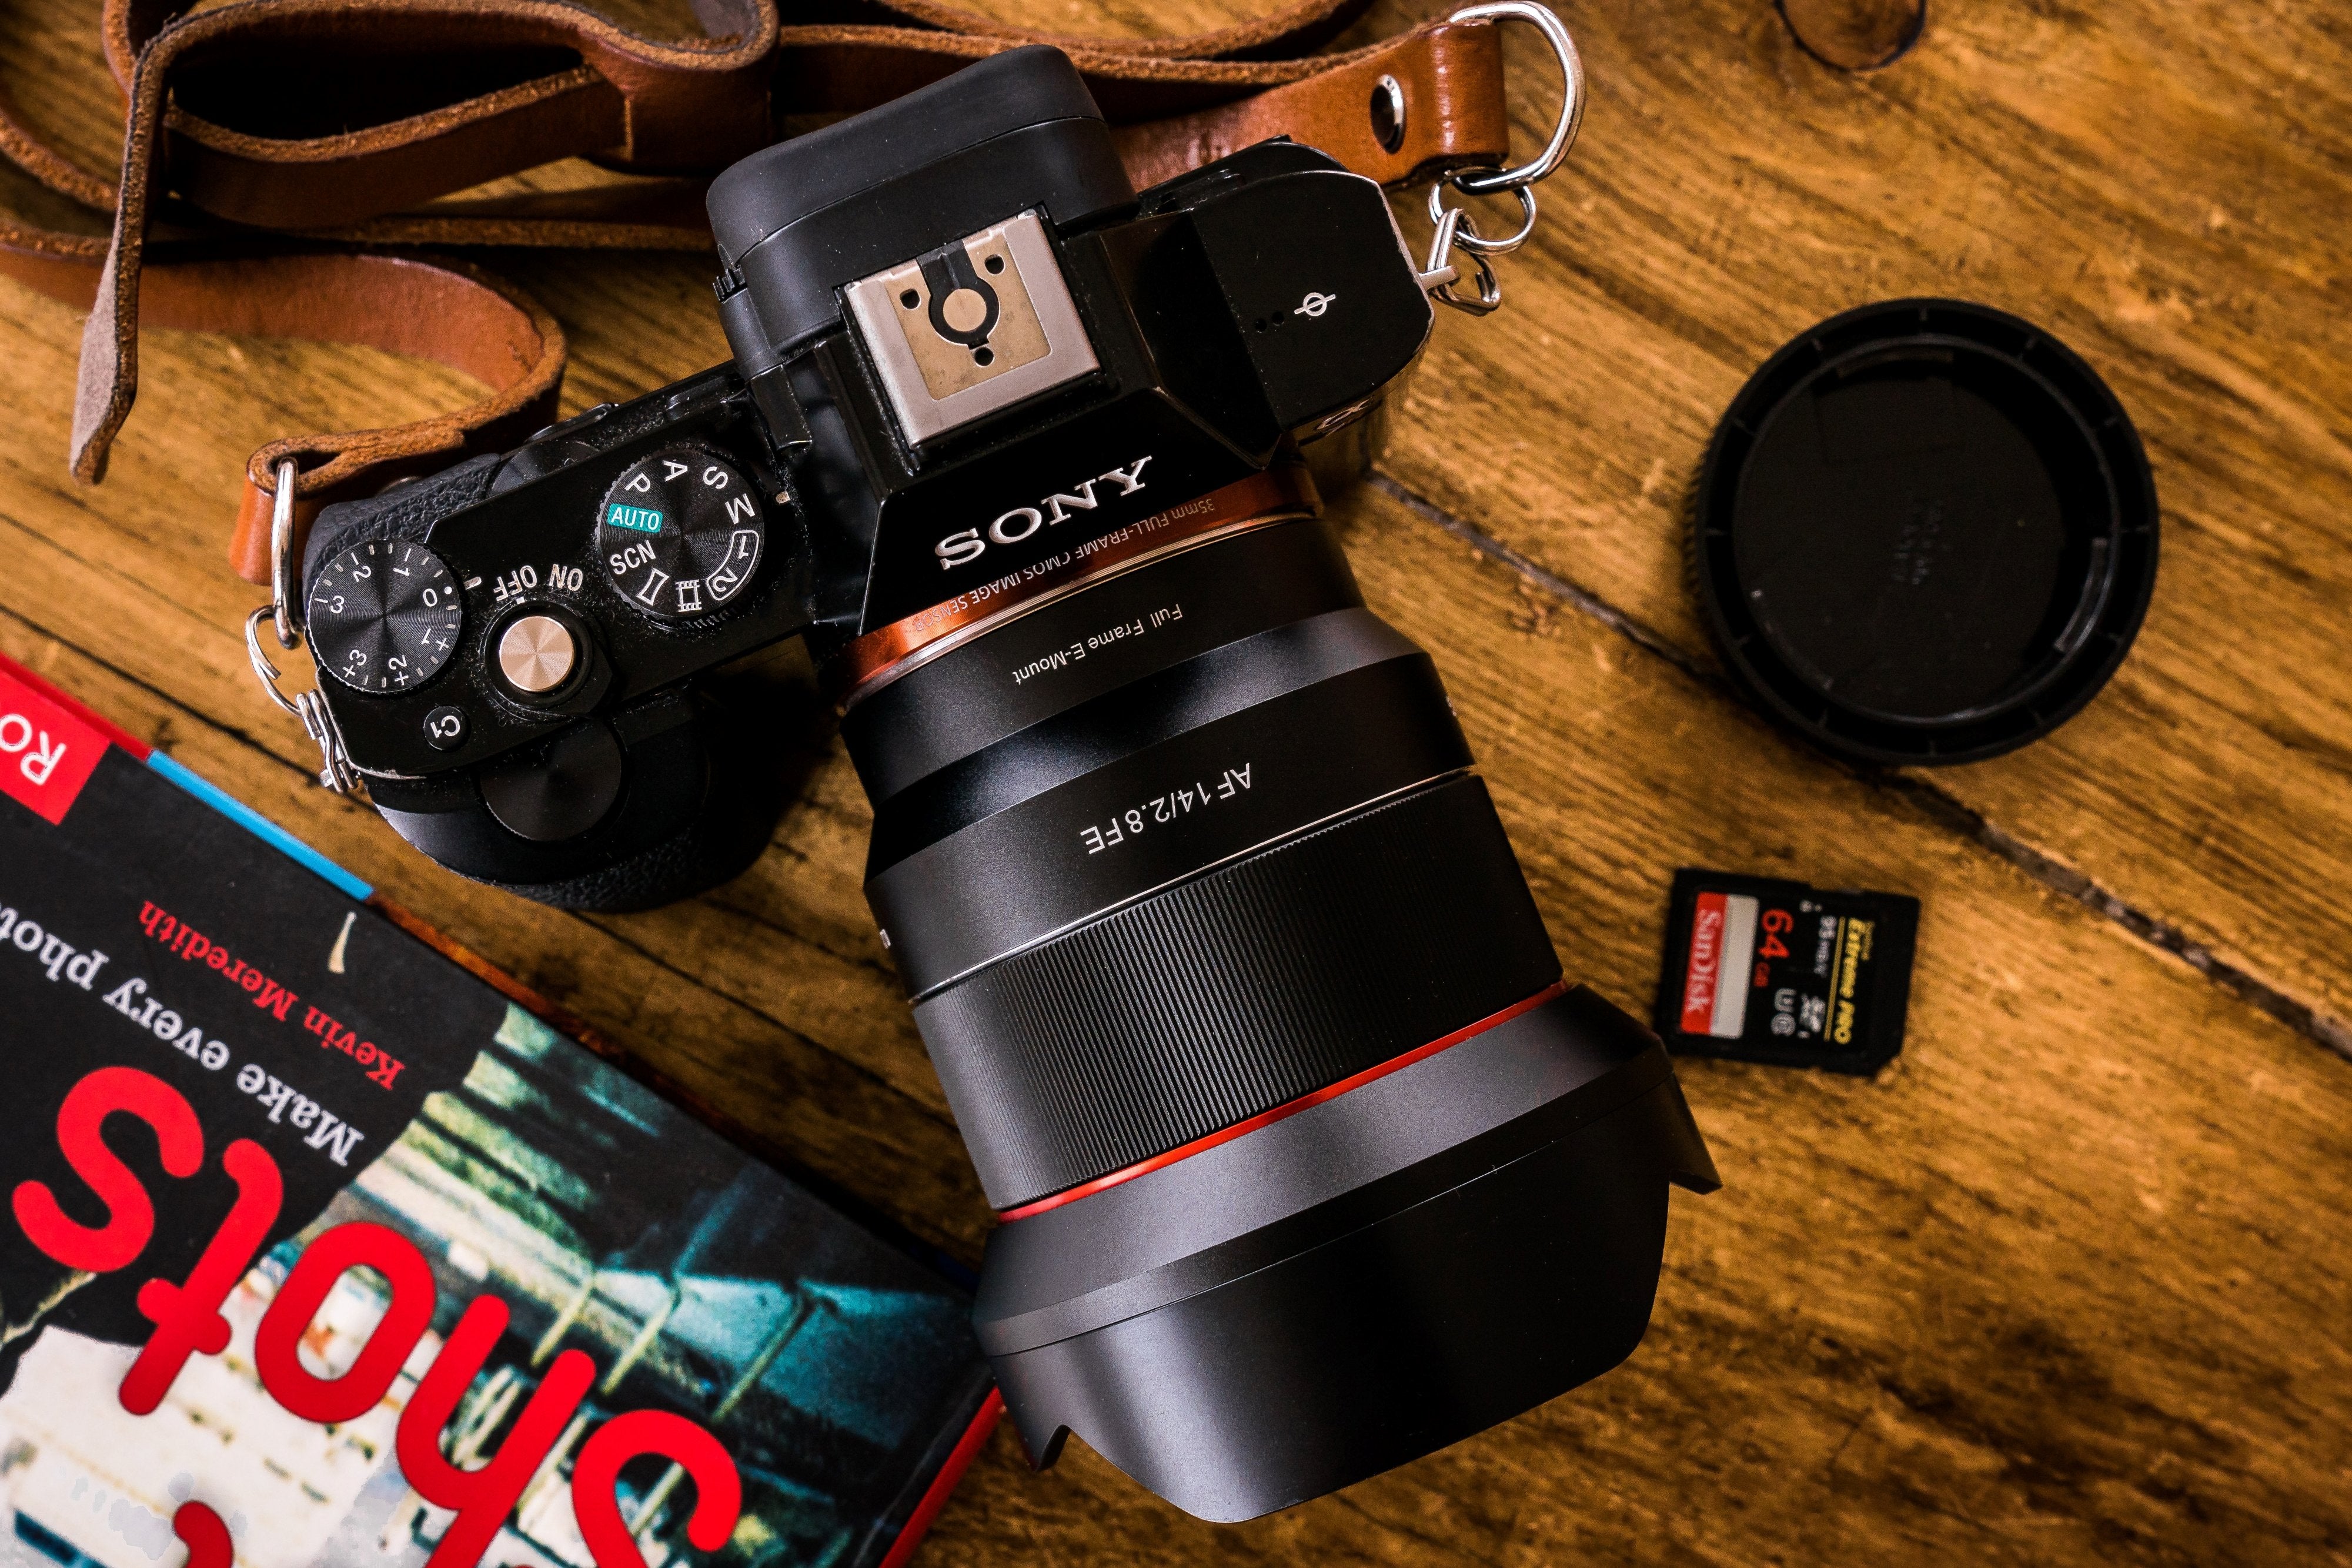 14mm F2.8 AF Wide Angle with Lens Station (Sony E)